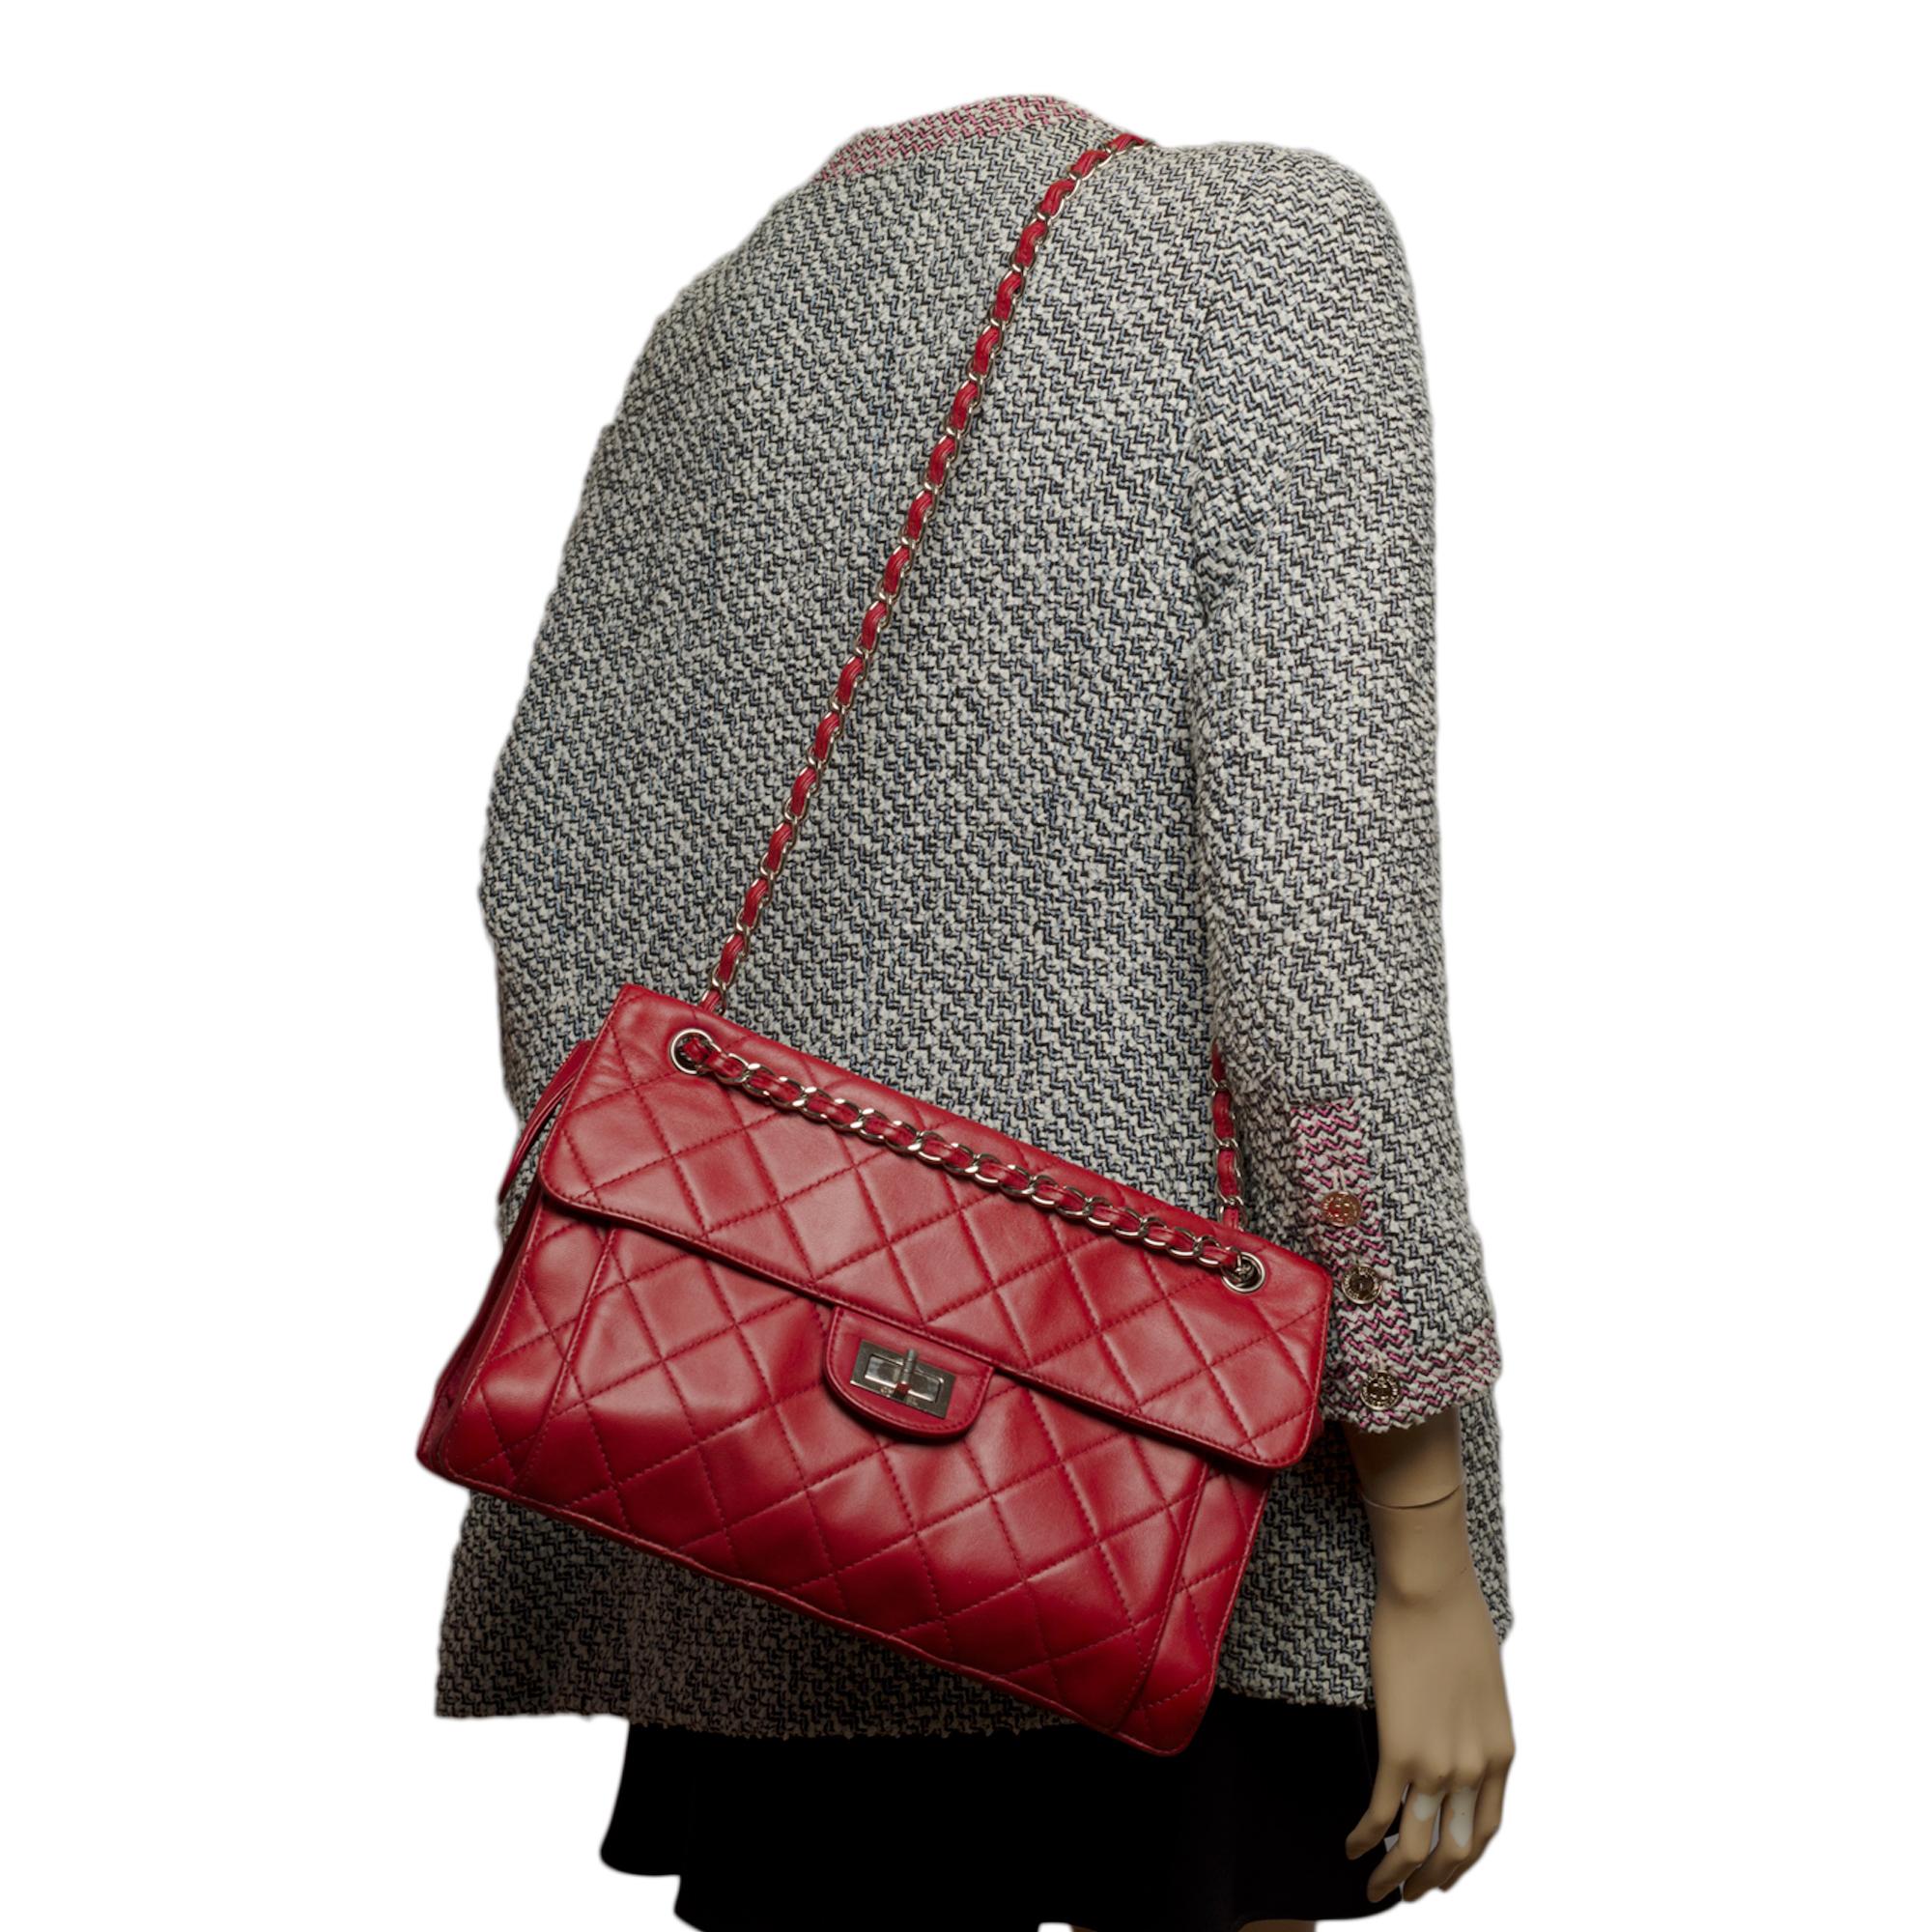 Chanel Classic 2.55 Maxi shoulder bag in red quilted leather, SHW 4